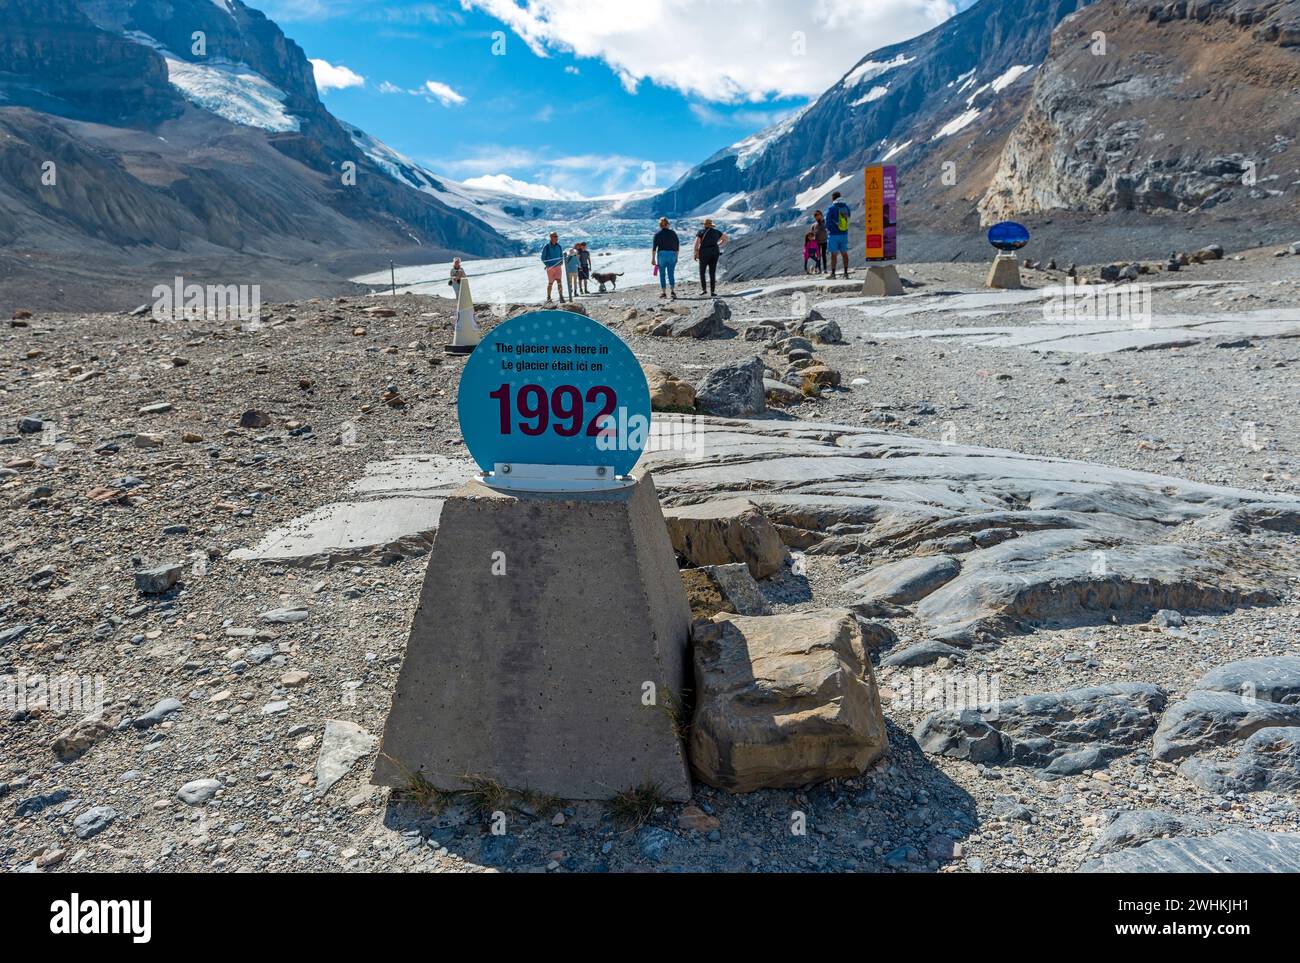 Athabasca Glacier retreat between 1992 and 2023 due to climate change, Jasper and Banff national park, Icefields parkway, Canada. Stock Photo